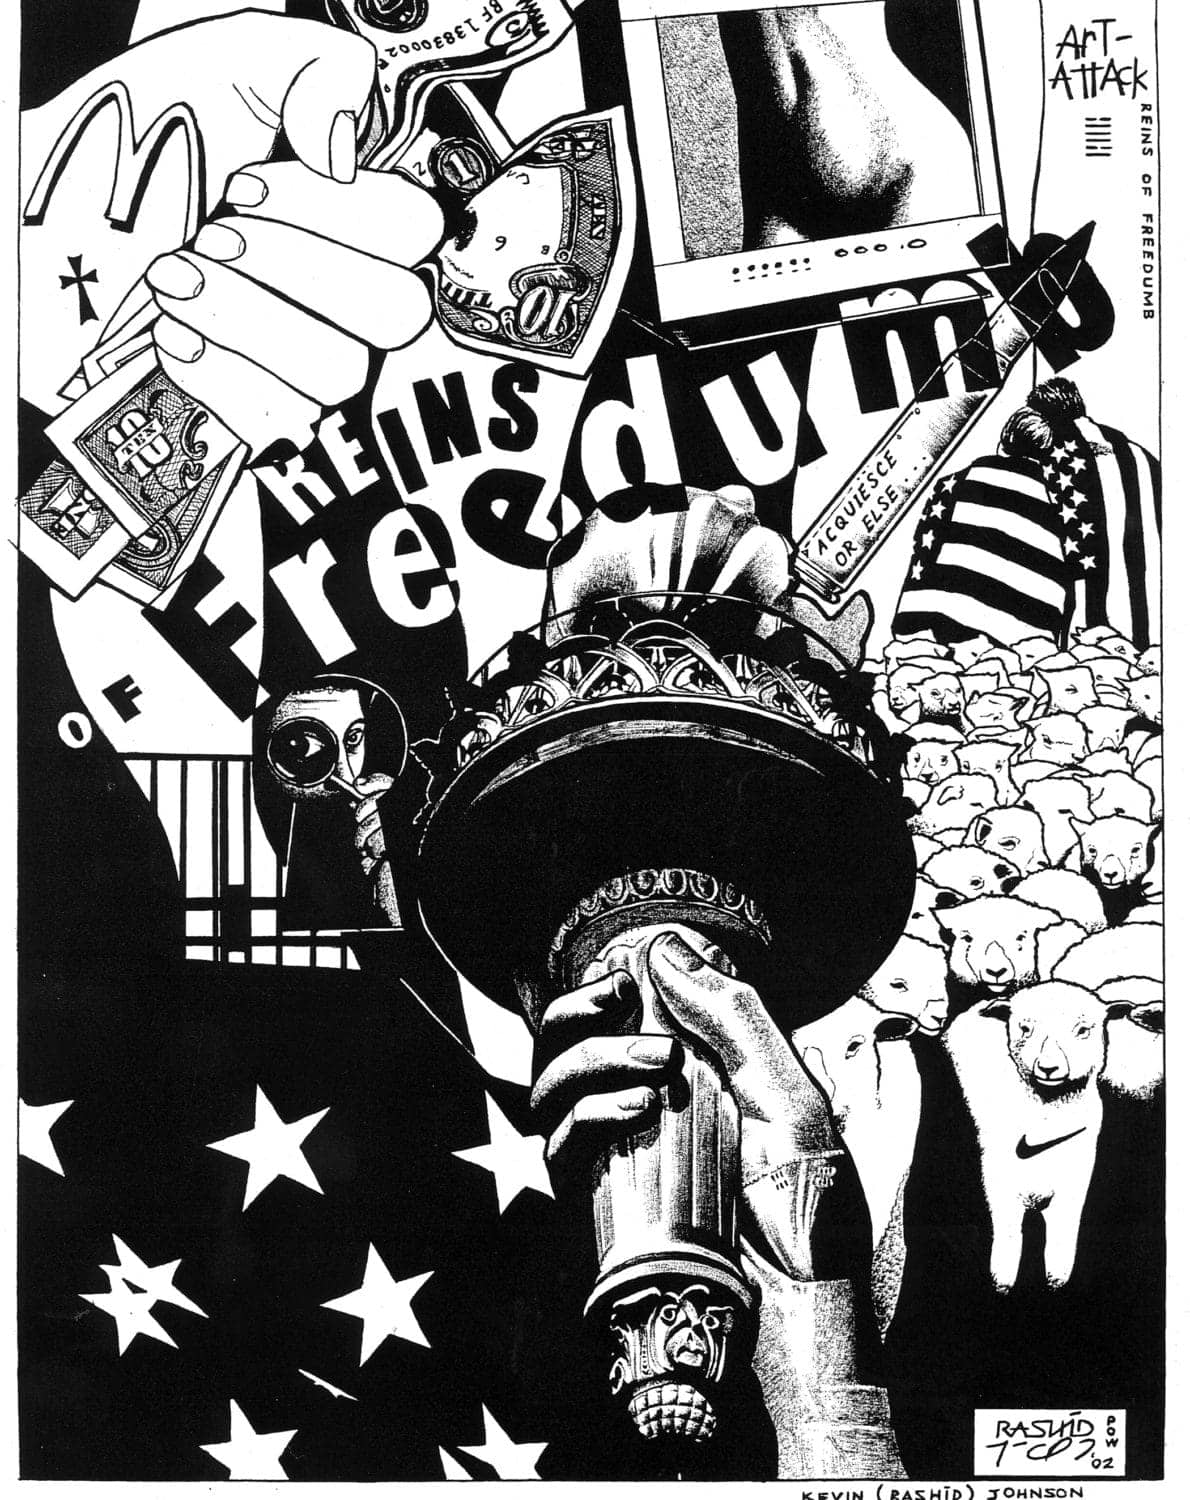 Reins-of-Freedumb-art-by-Kevin-Rashid-Johnson-2002-1, <strong>The advertising industry: Perpetuating wage slavery and manufacturing artificial desires</strong> , Abolition Now! News & Views 